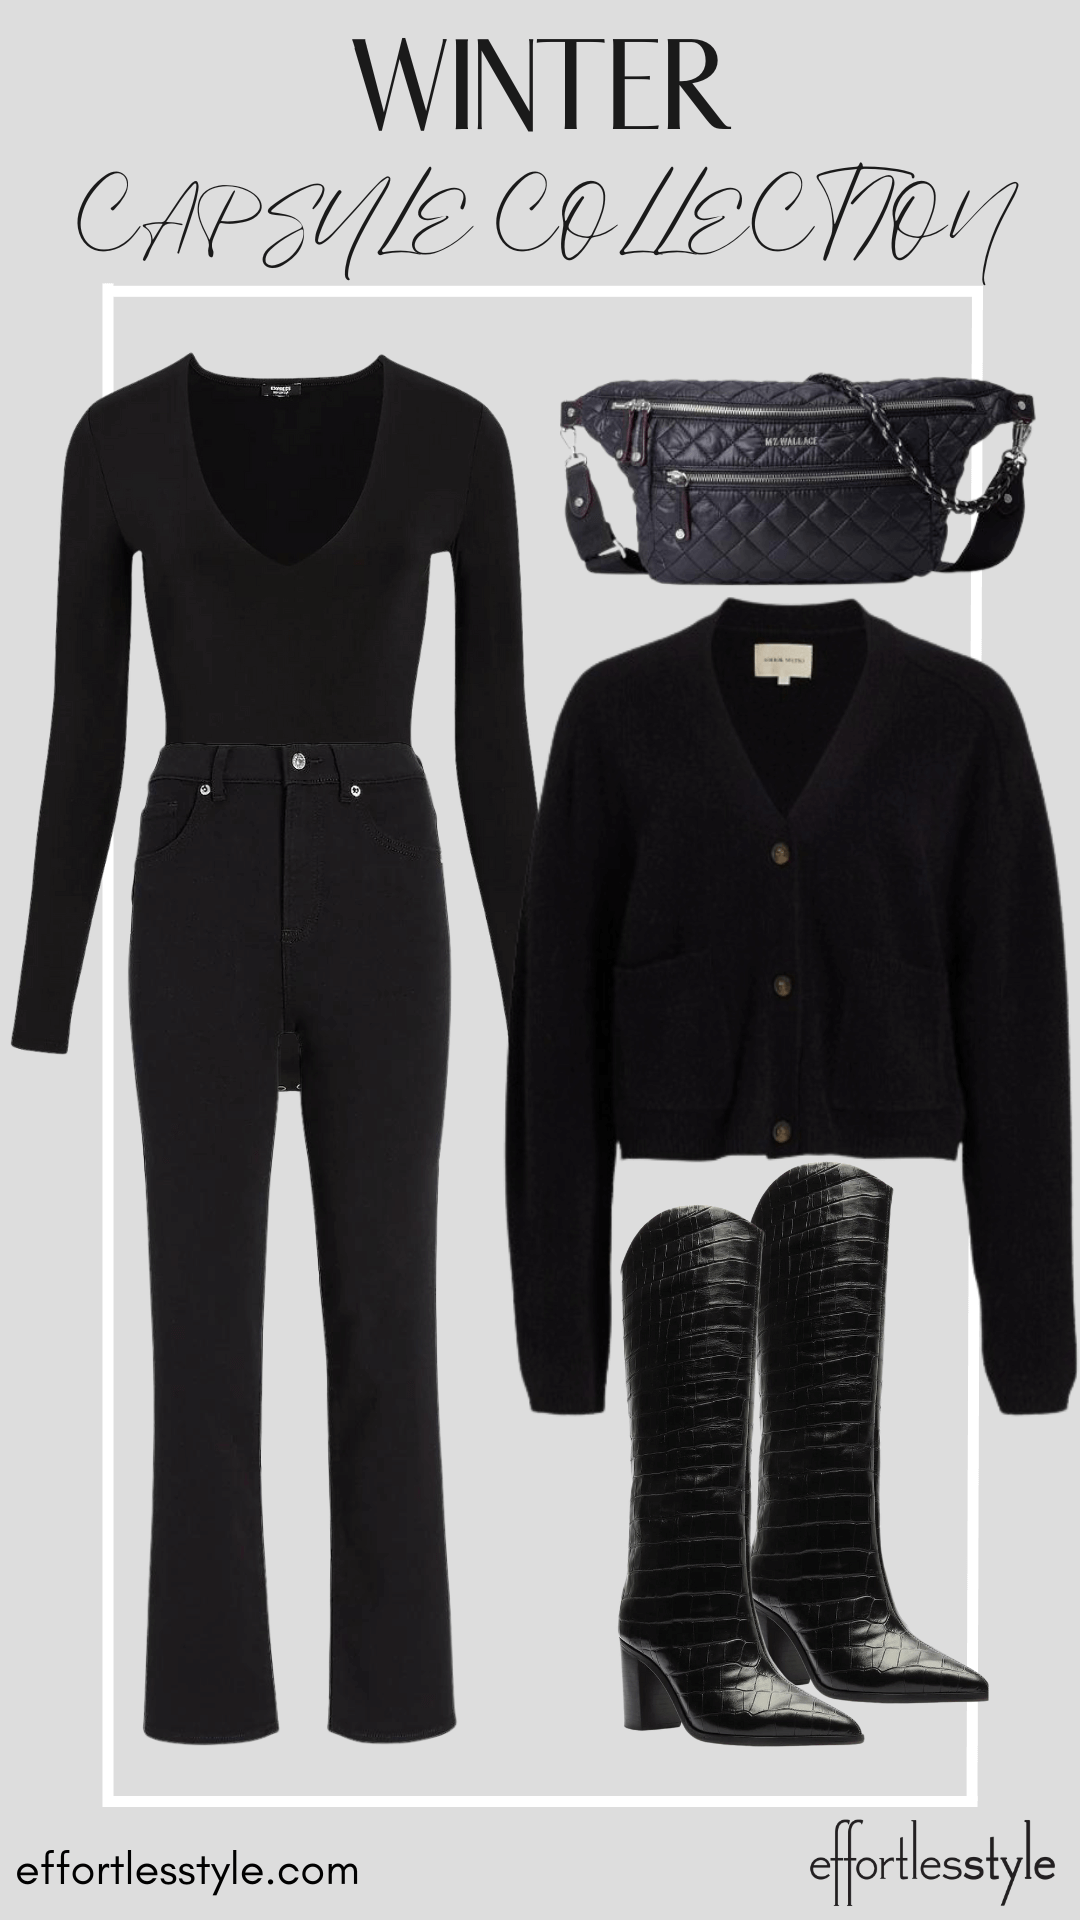 How To Wear Our Winter Capsule Wardrobe - Part 2 Cropped Cardigan & Black Bodysuit & Black Jeans how to wear all black this winter how to layer a cardigan over a bodysuit how to style a cropped cardigan for winter personal stylists share style inspiration for cropped cardigan